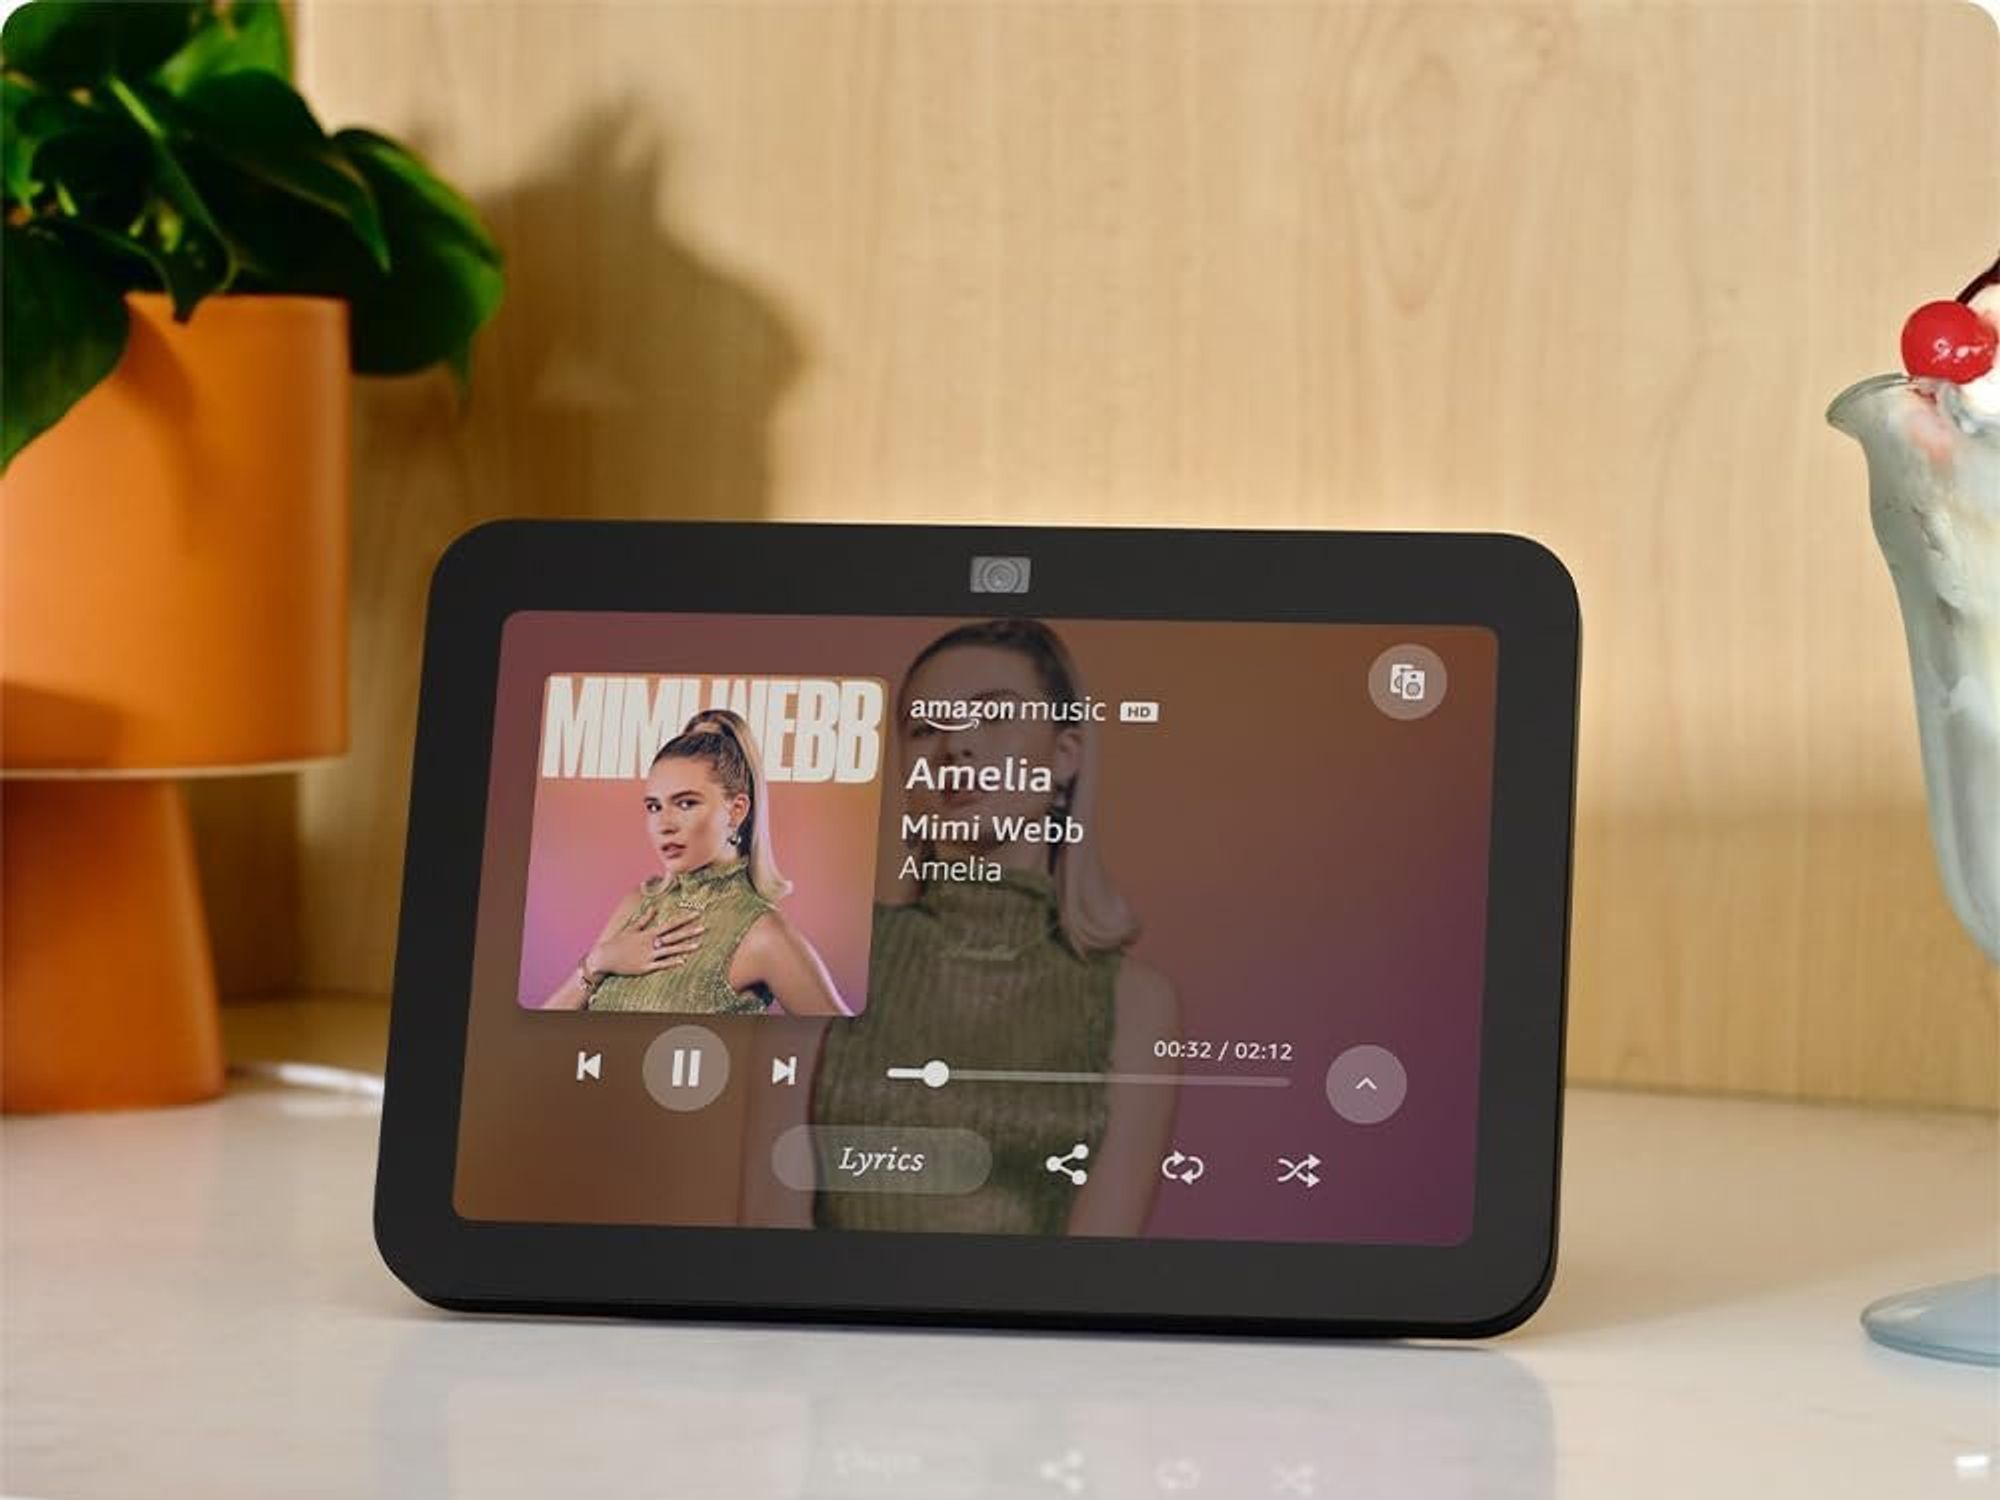 The Echo Show 8 smart display by Amazon